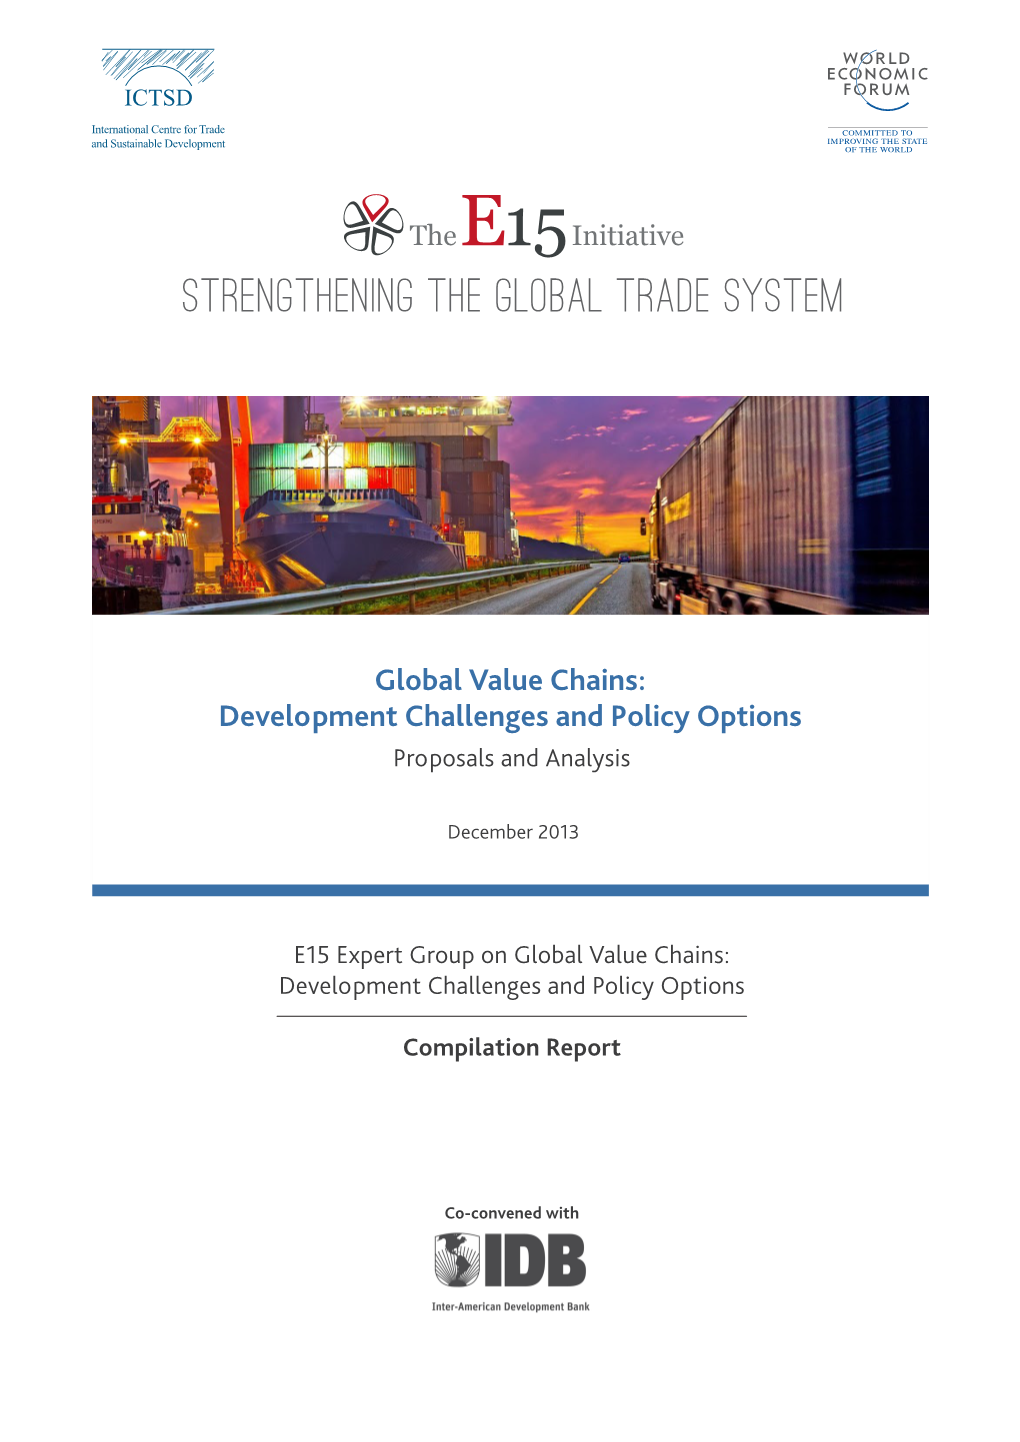 Global Value Chains: Development Challenges and Policy Options Proposals and Analysis